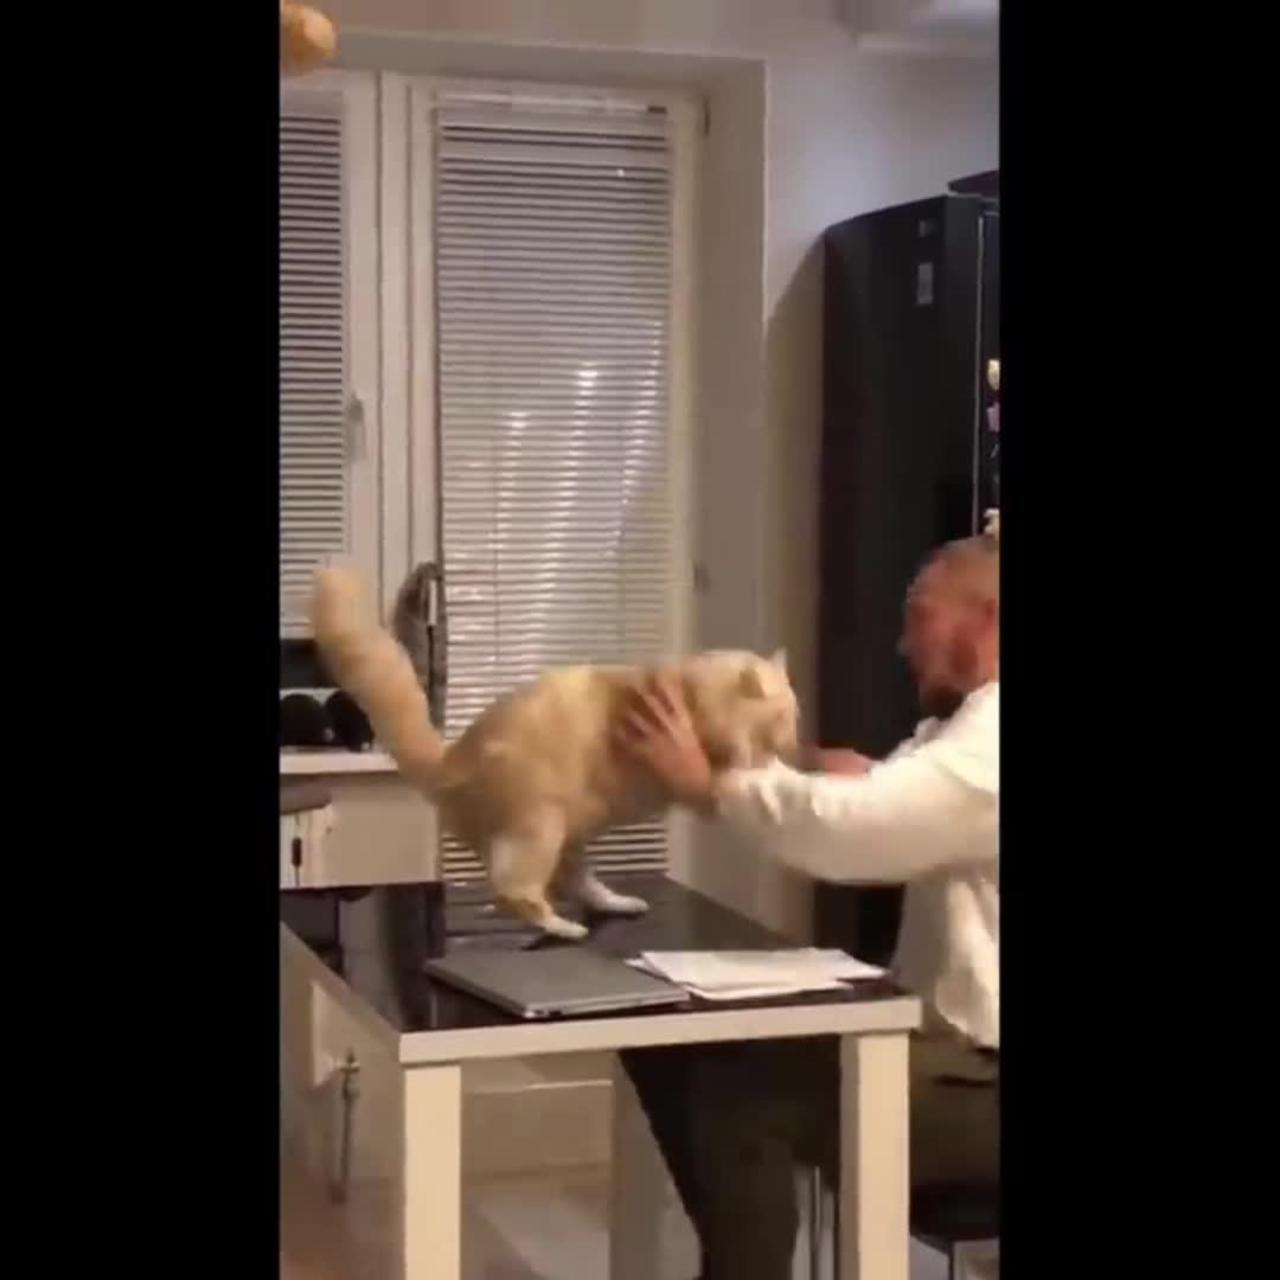 Man tease a cute cat and cat angrily bite his hand